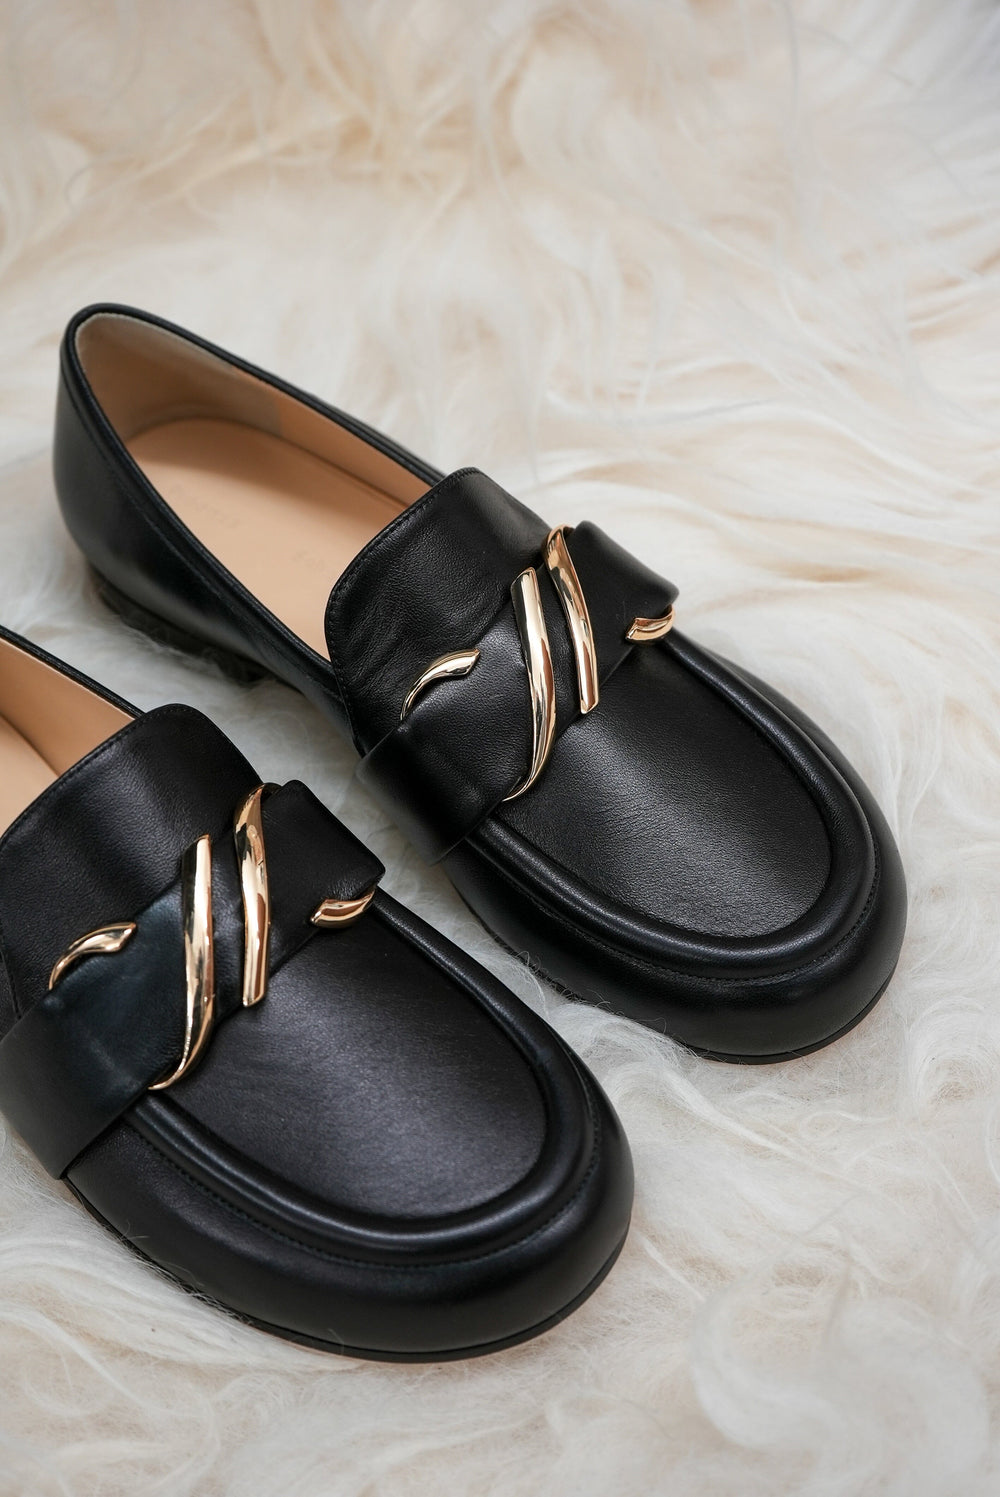 LEATHER MONOGRAM LOAFERS SHOES PROENZA SHOULER 